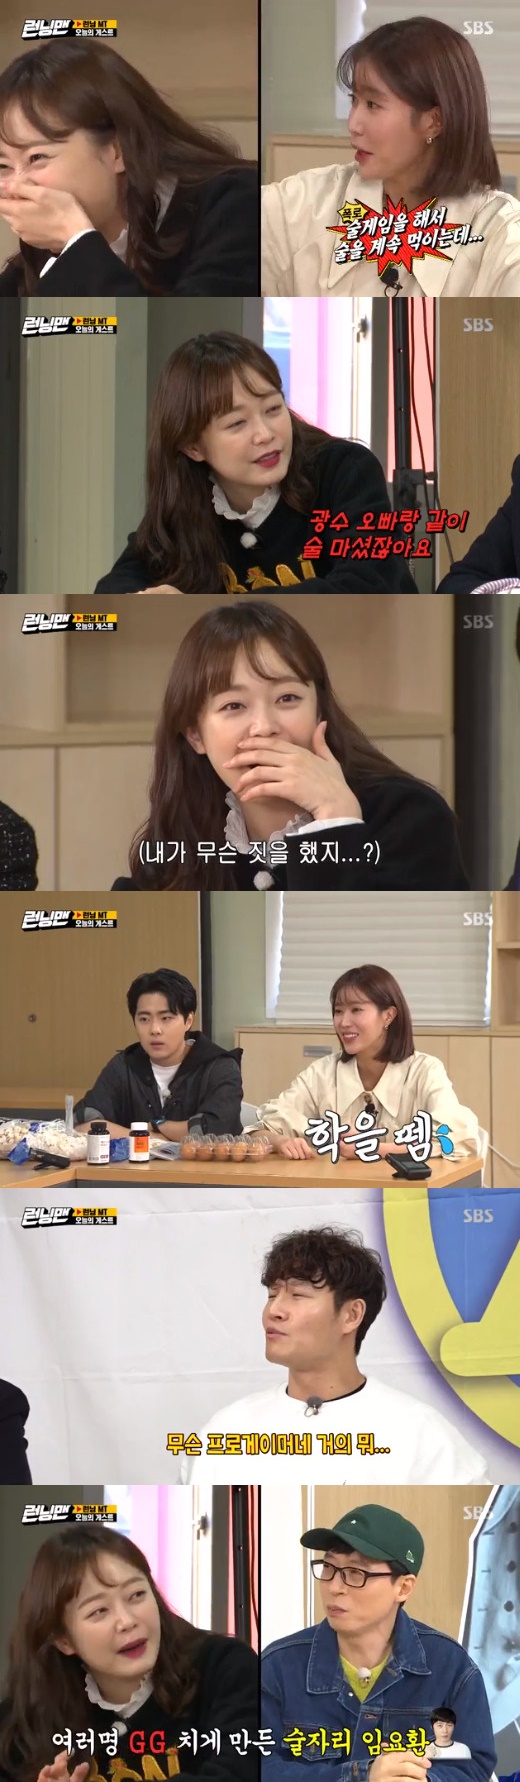 Actor Im Soo-hyang on Running Man Disclosures on Jeon So-minSBS Running Man 494 times broadcast on the afternoon of the 15th was decorated with Running Man ticket honey jam MT.Guest Im Soo-hyang said, I have a relationship with Jeon So-min. I have been drinking with Lee Kwang-soo in the past.I ran away then, and Jeon So-min wants to play a drinking game, but I keep feeding alcohol, he said. The escape time was 3 to 4 am.Jeon So-min, who was embarrassed by this, said, Running Man made me this way.On the other hand, Cho Byung-gyu said, We are high school seniors. I visited my school when I was in my second grade.I asked for a sign at the playground, but I was busy, so I went. 